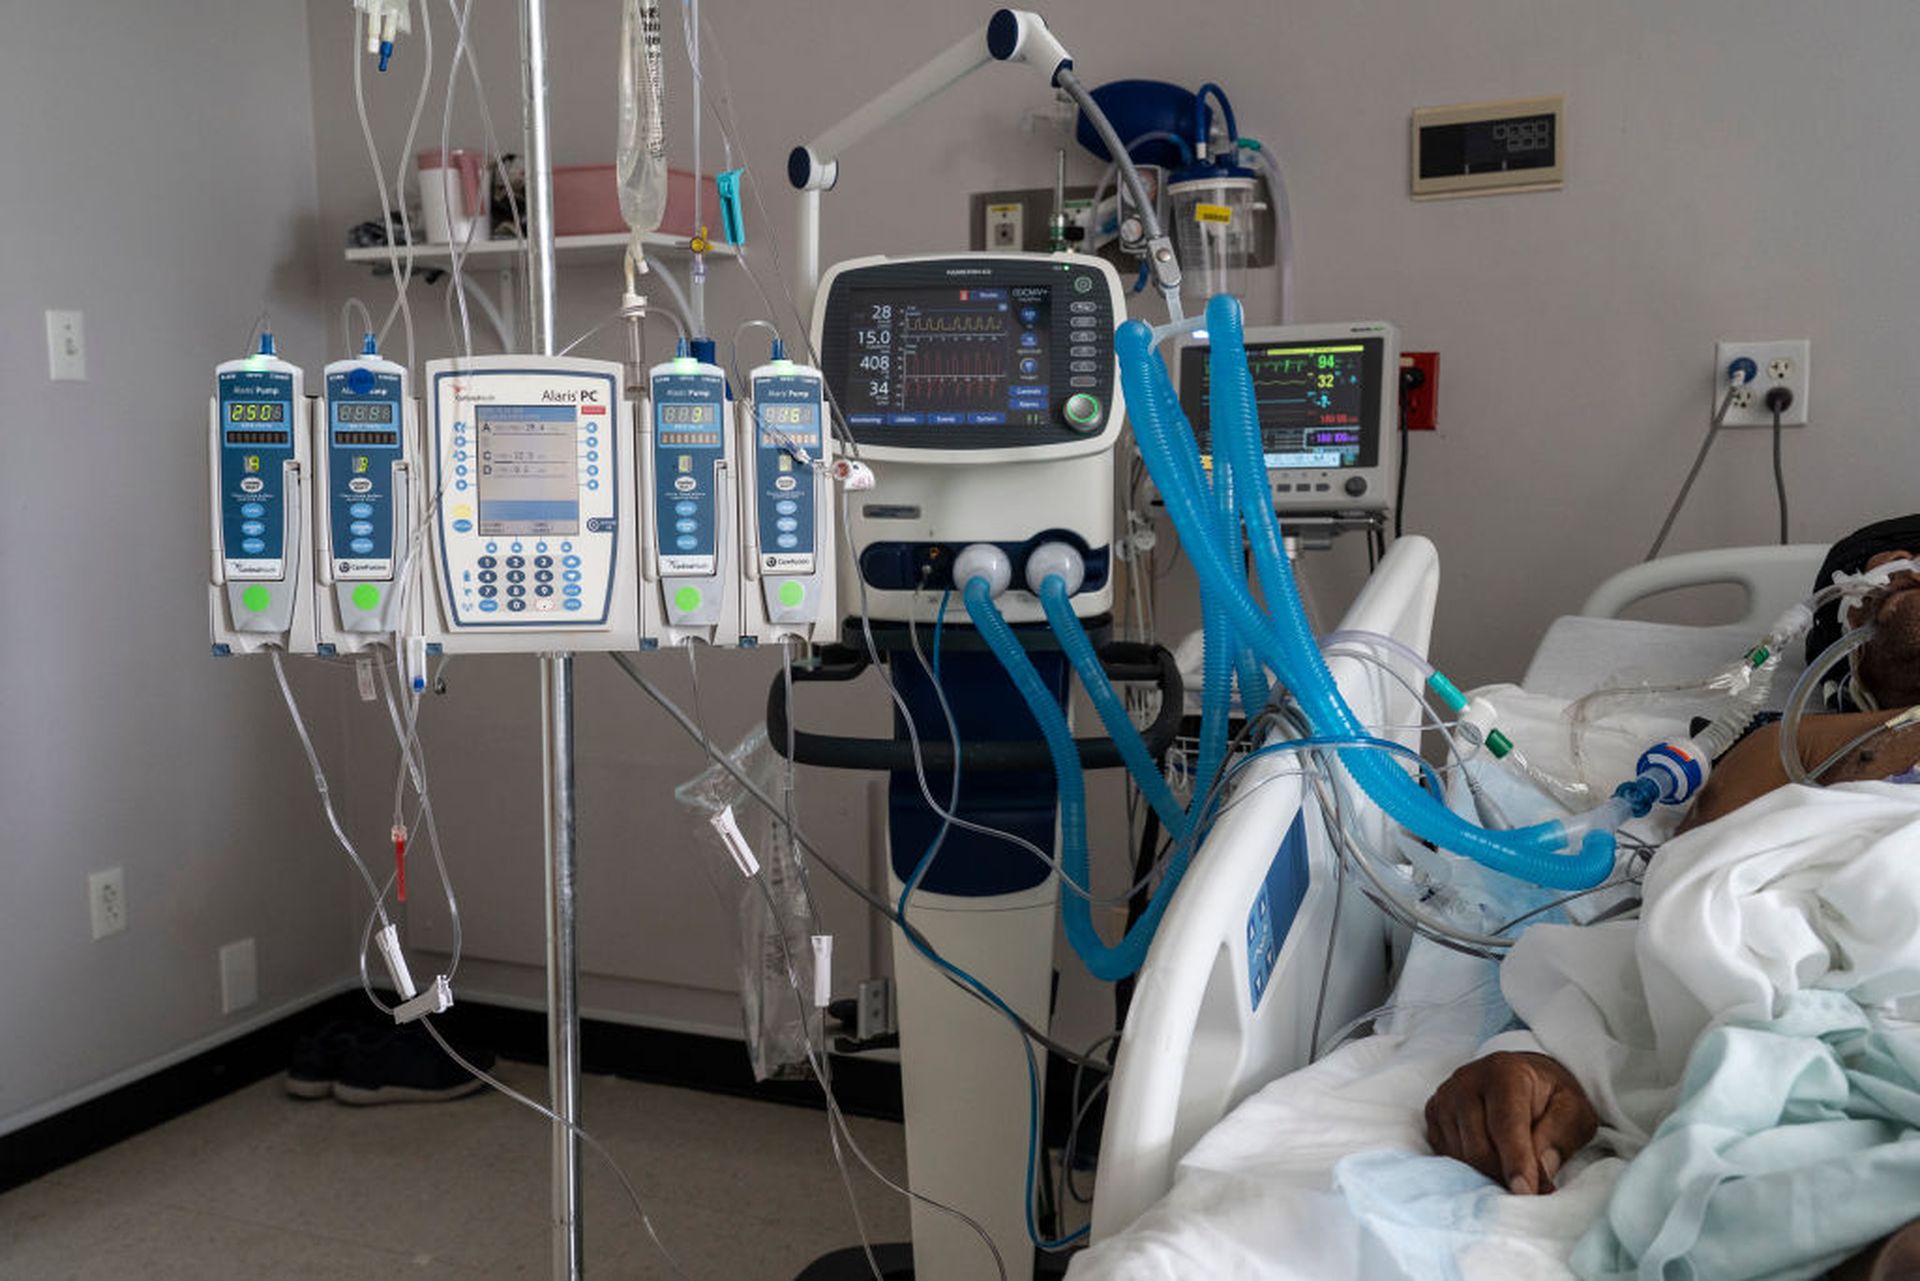 HOUSTON, TX &#8211; JULY 2: (EDITORIAL USE ONLY)  A patient is connected to a ventilator and other medical devices in the COVID-19 intensive care unit at the United Memorial Medical Center on July 2, 2020 in Houston, Texas. COVID-19 cases and hospitalizations have spiked since Texas reopened, pushing intensive-care wards to full capacity and sparki...